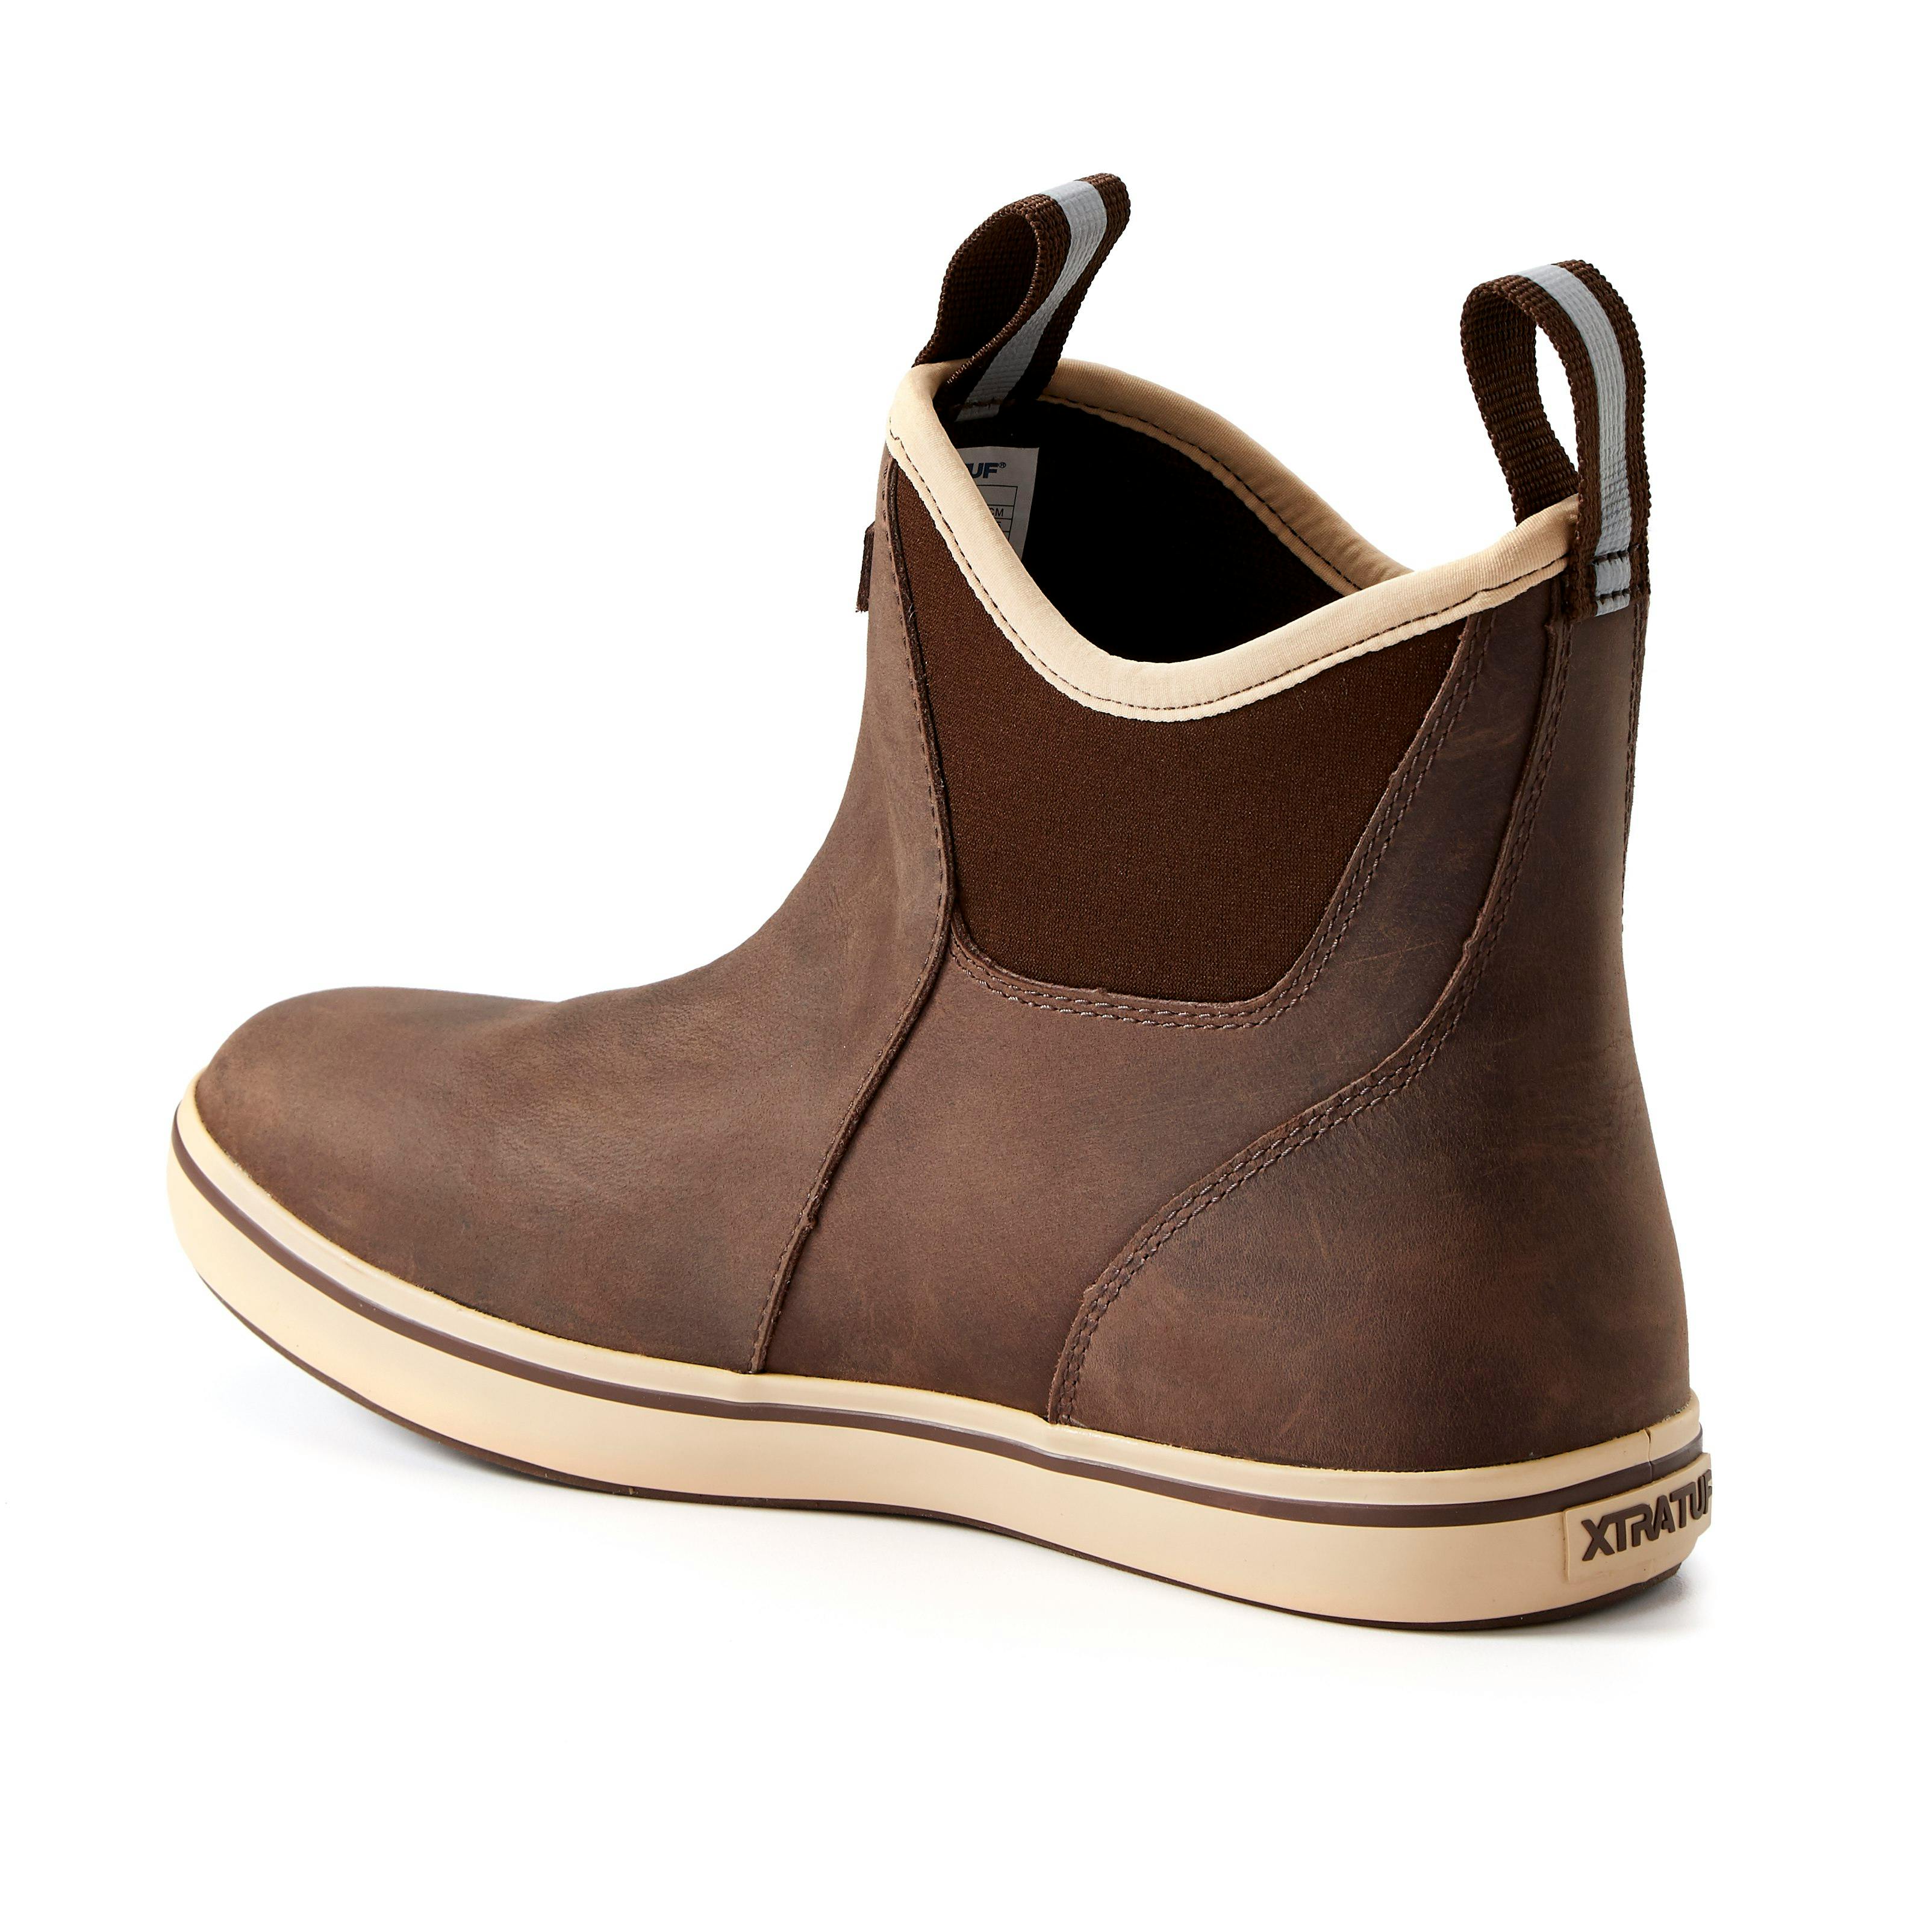 XTRATUF Leather Ankle Deck Boot - Brown, Work Boots